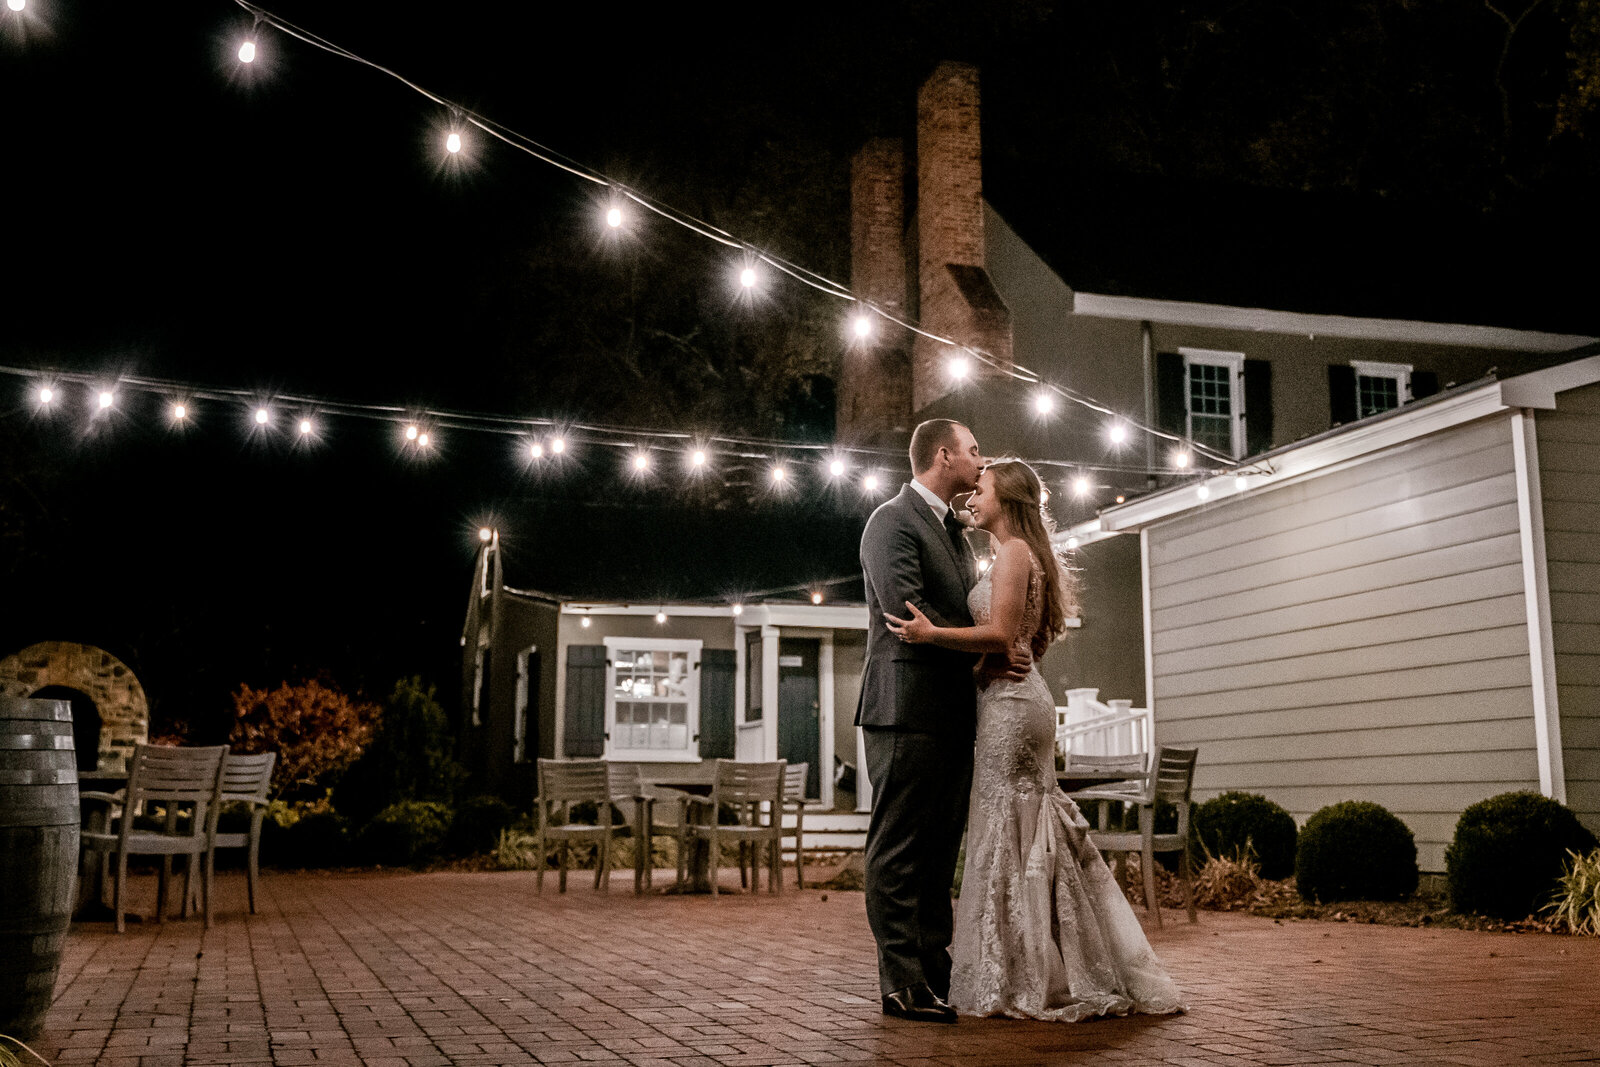 A bride and groom share a dance under string lights on a patio during their wedding at Fleetwood Farm Winery in Leesburg Virginia